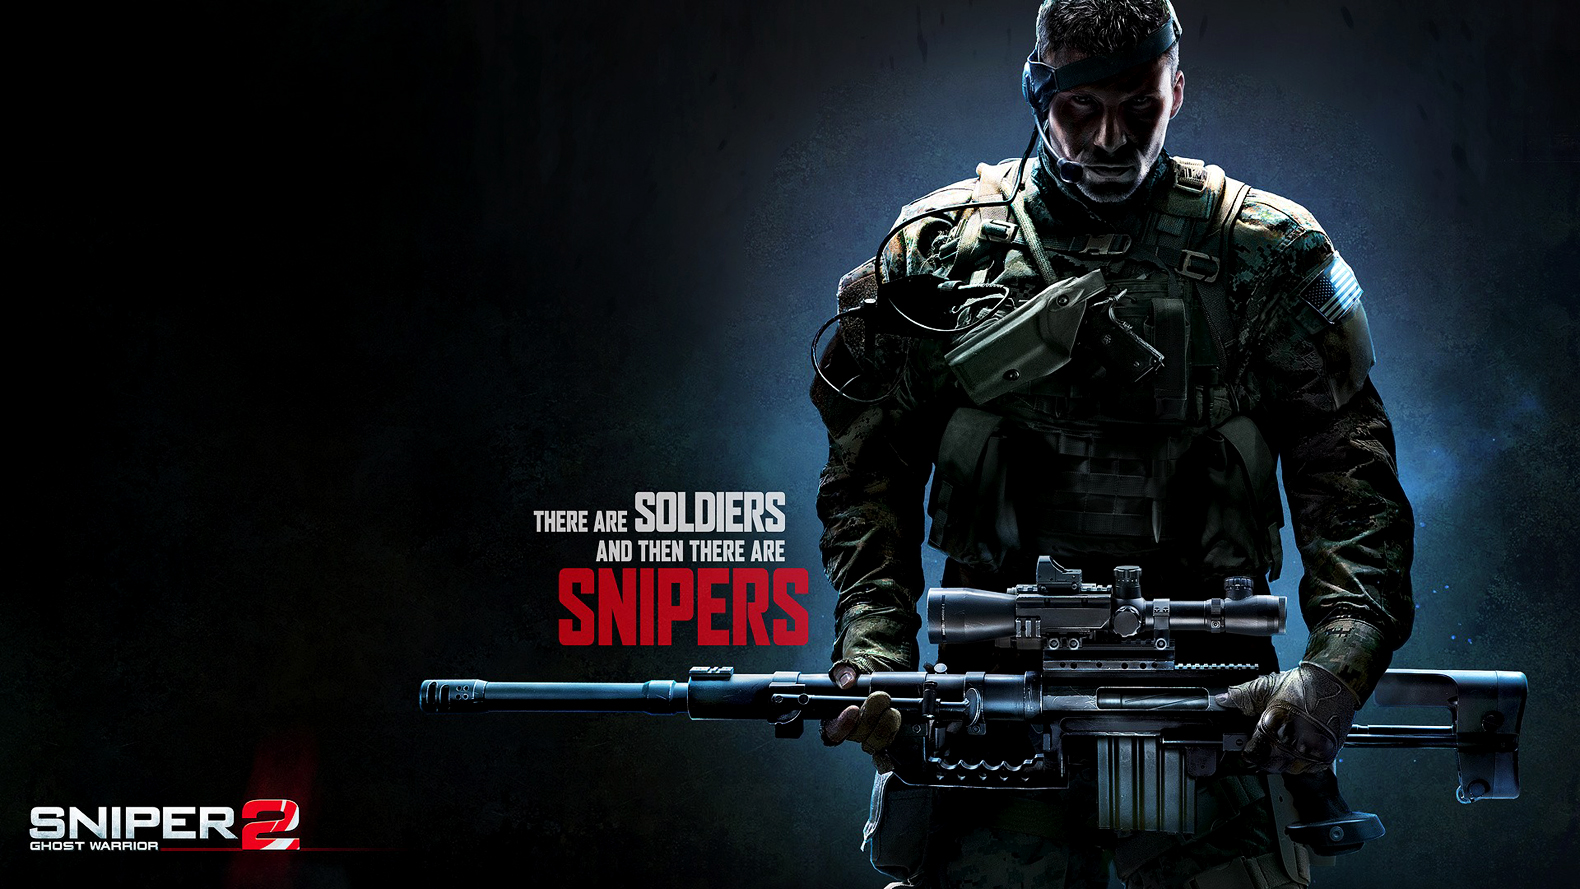 Best Sniper Wallpaper From Video Games In